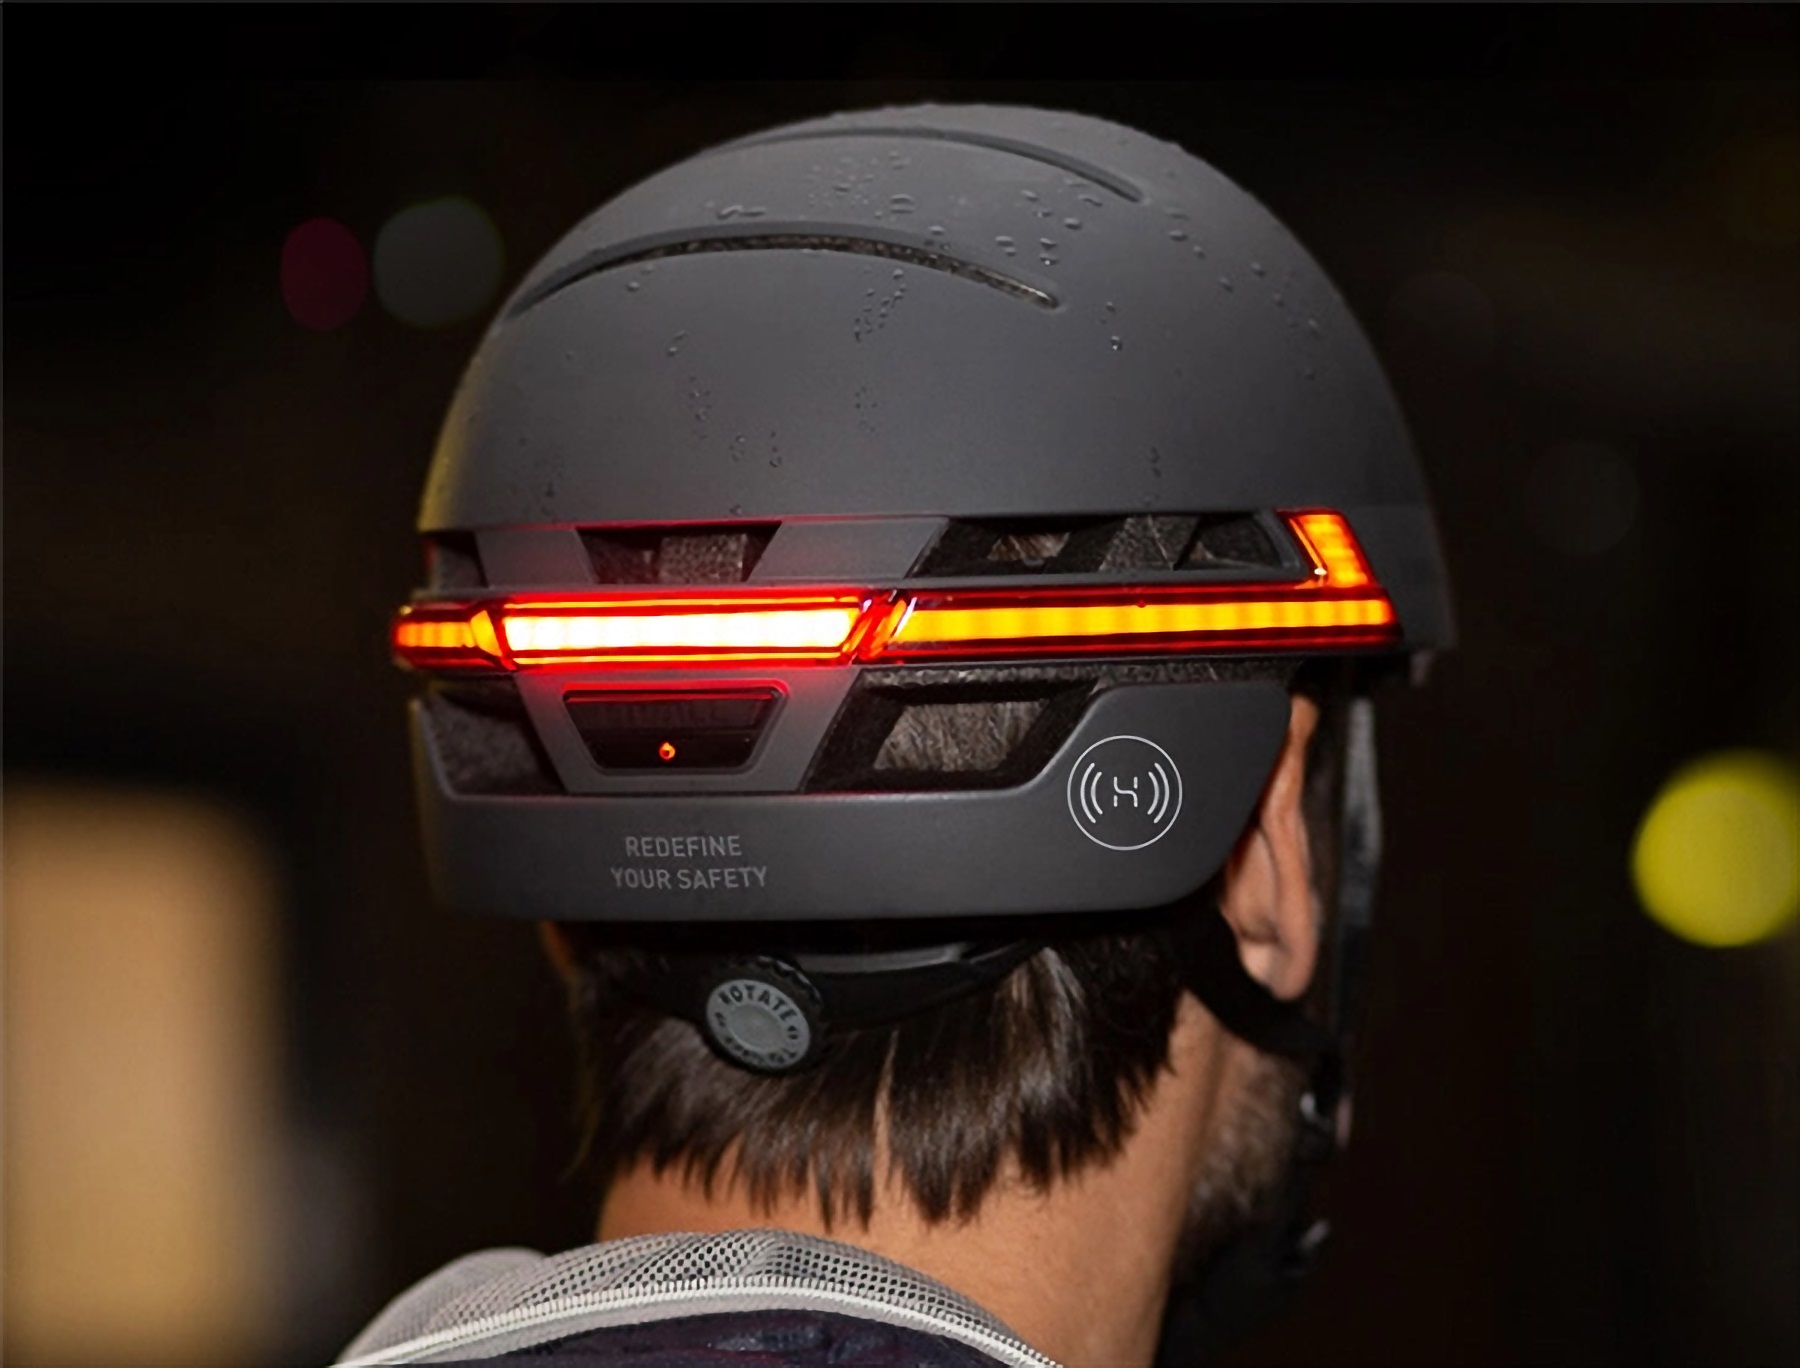 Huawei unveiled a HarmonyOS-based smart helmet that can make calls and turn on turn signals